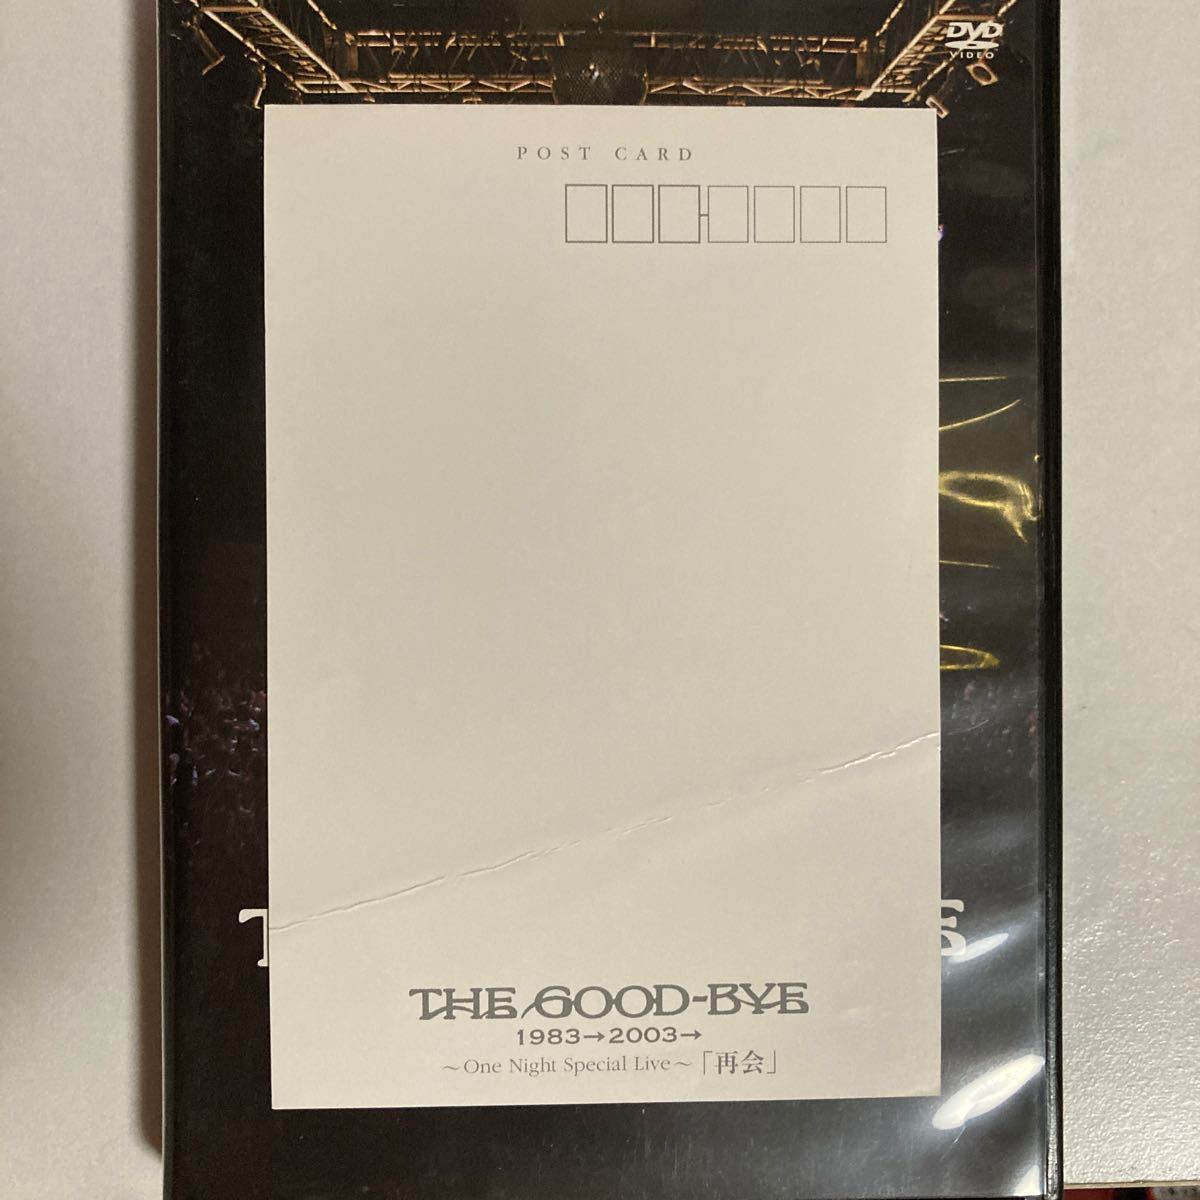 THE GOOD-BYE 1983→2003→ One Night Special Live DVD 「再会」野村義男　曾我泰久